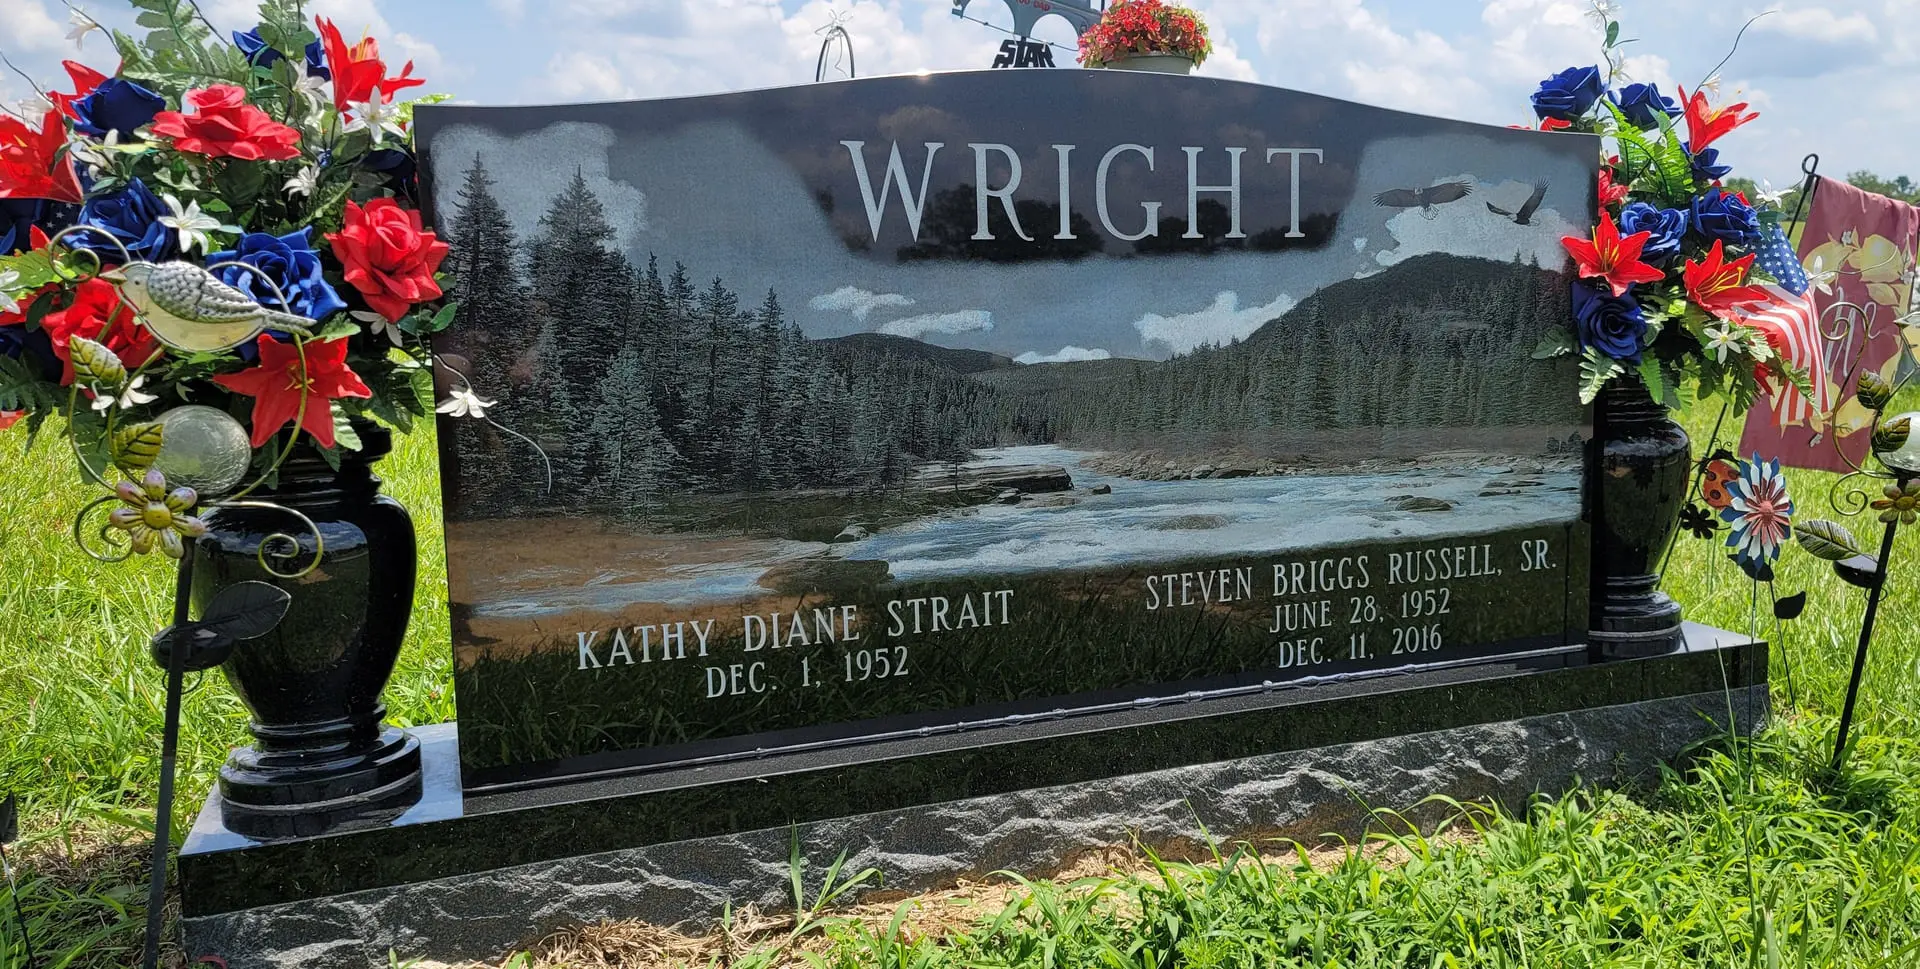 A memorial slab for Kathy Diane Strait and Steven Briggs Russel